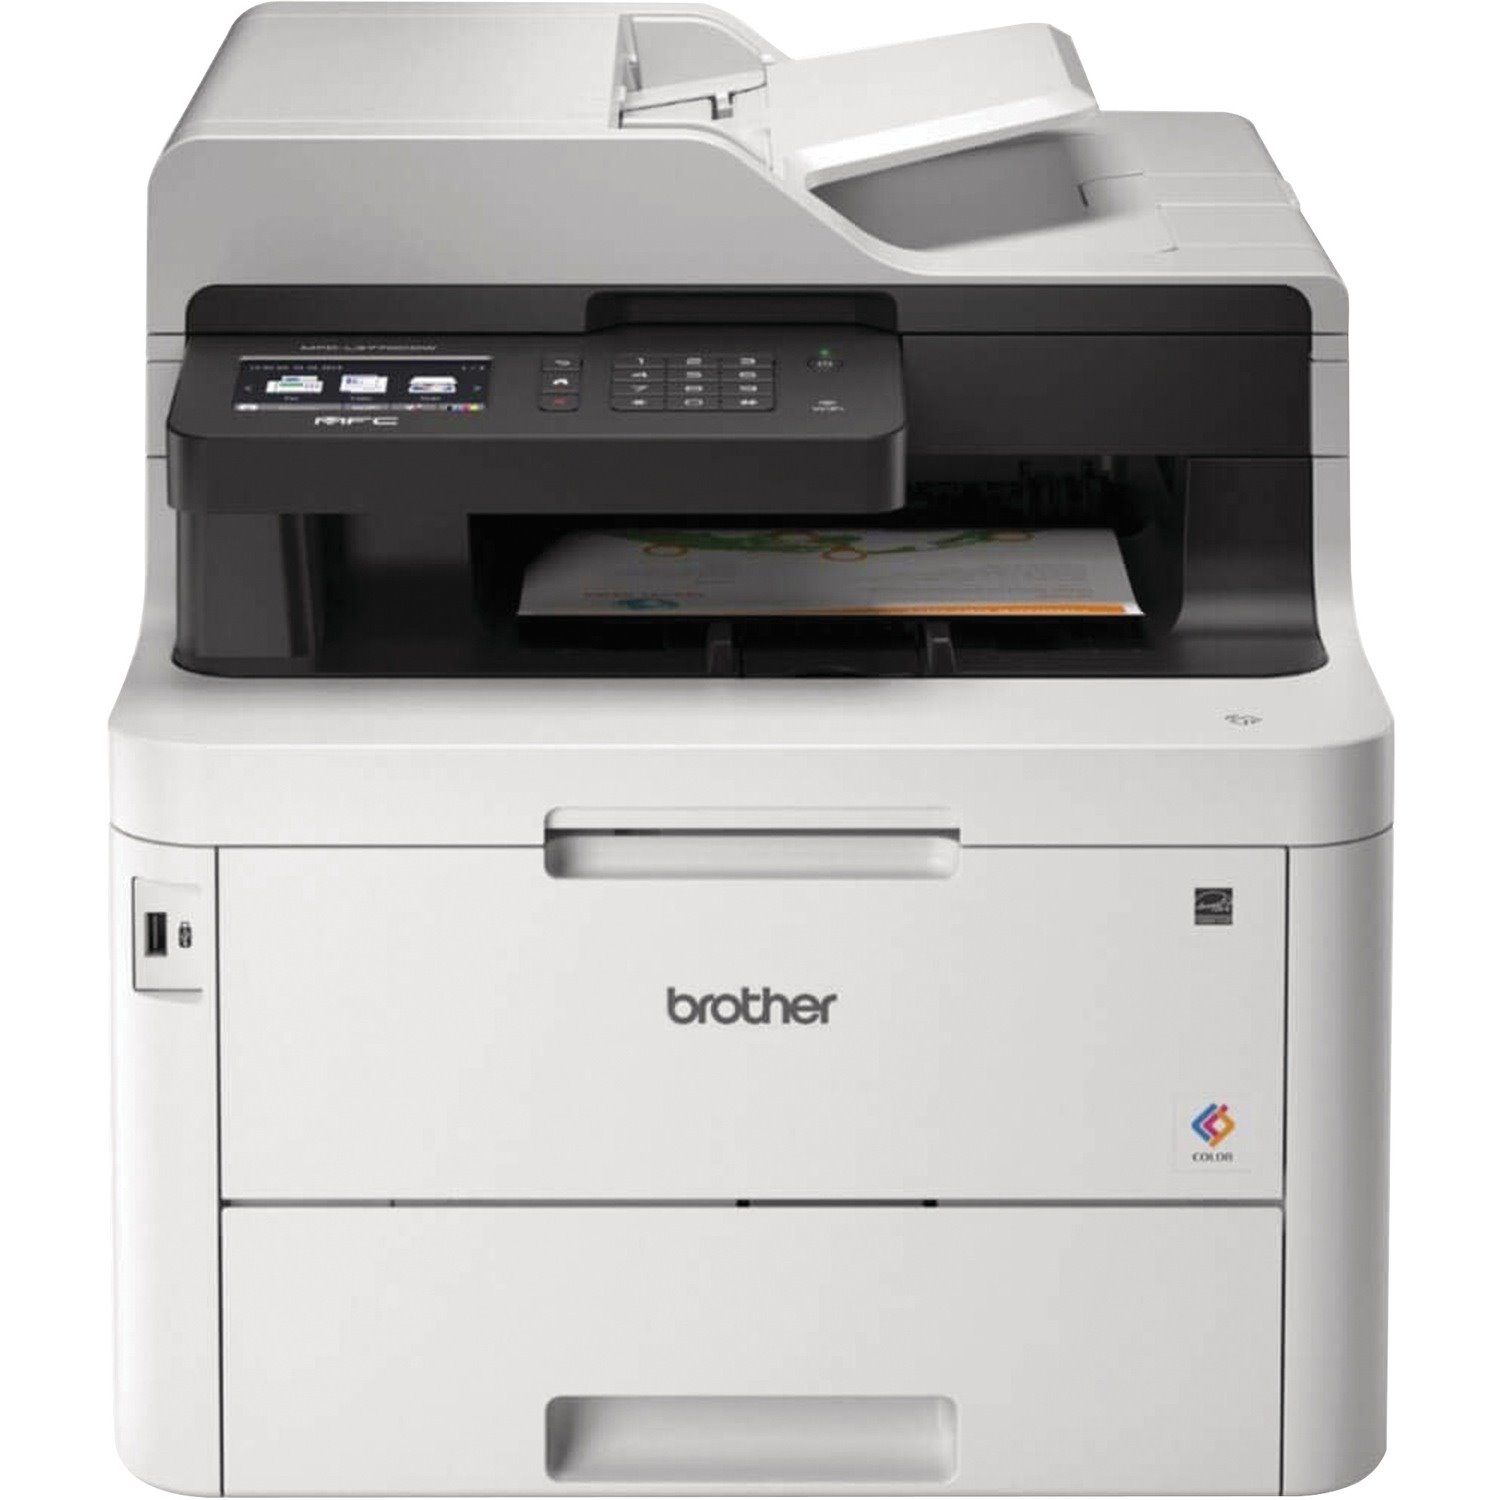 Brother MFC-L3770CDW Compact Digital Color All-in-One Printer Providing Laser Quality Results with 3.7" Color Touchscreen, Wireless and Duplex Printing and Scanning